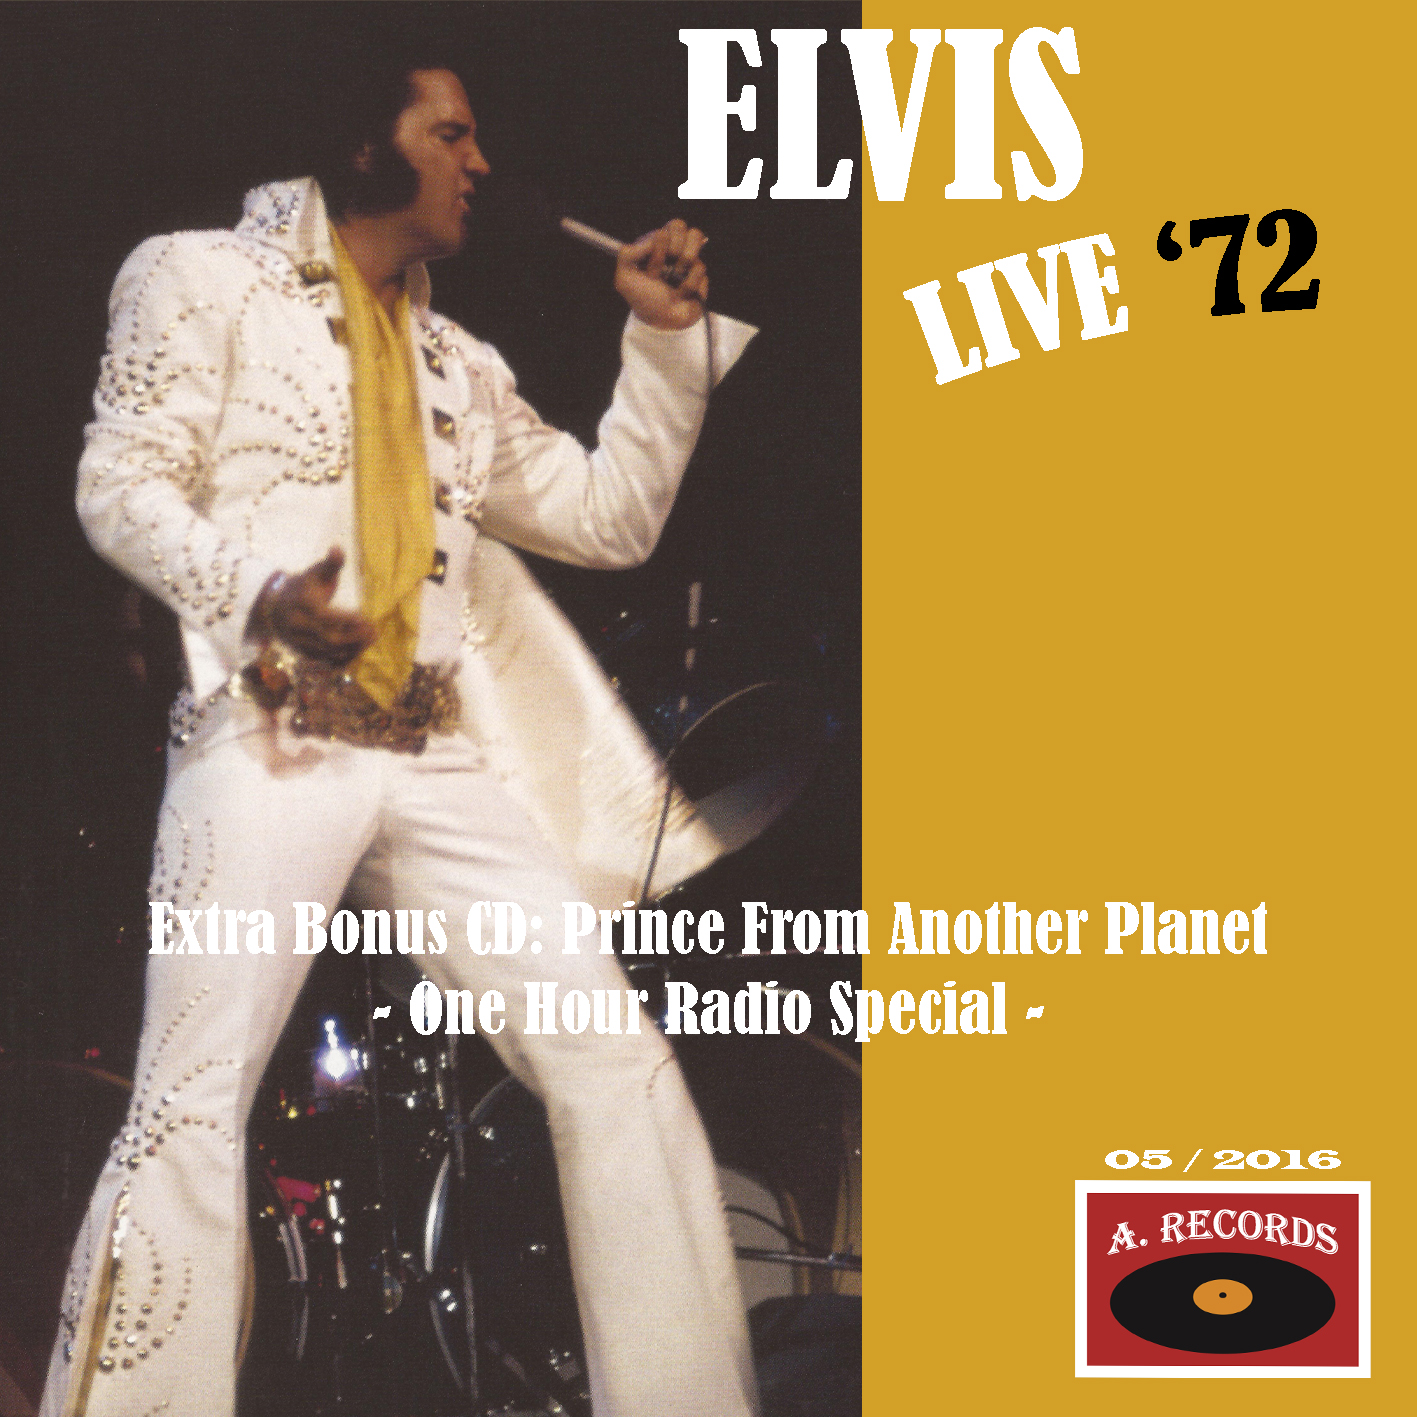 Elvis Live '72 (May 2016)